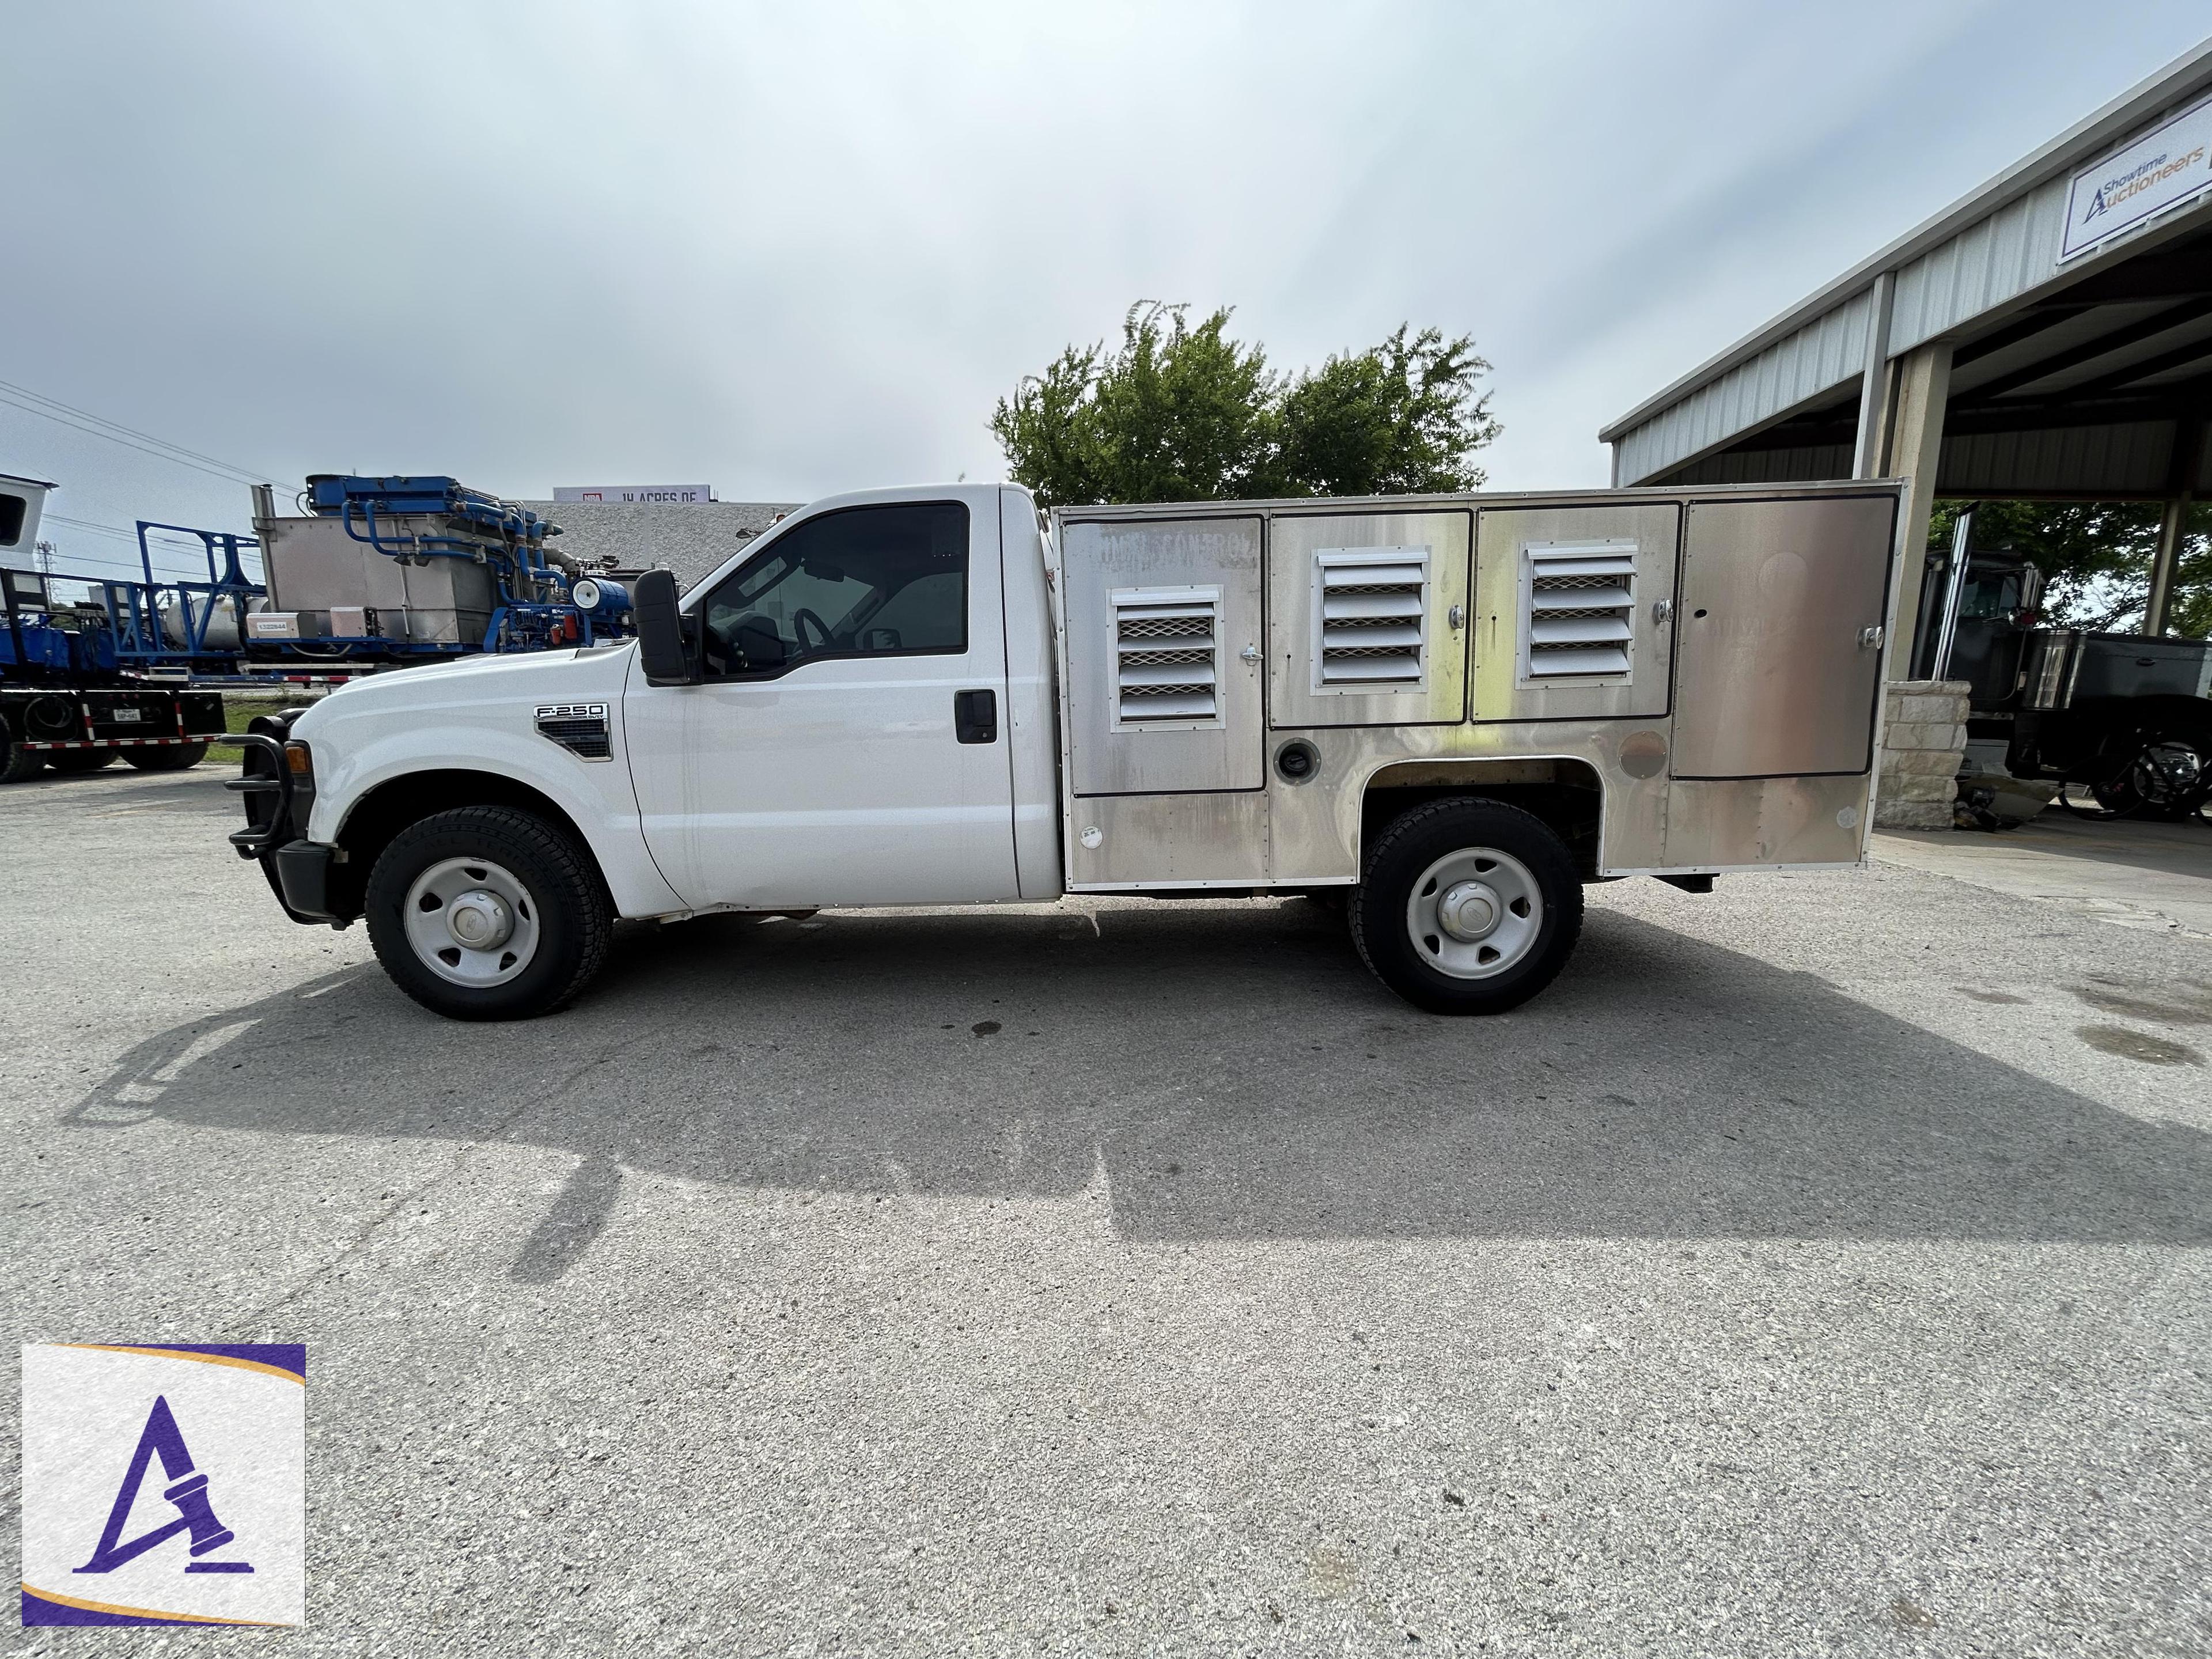 2008 Ford F-250 Animal Control Truck, ONLY 130,742 On The Dash!